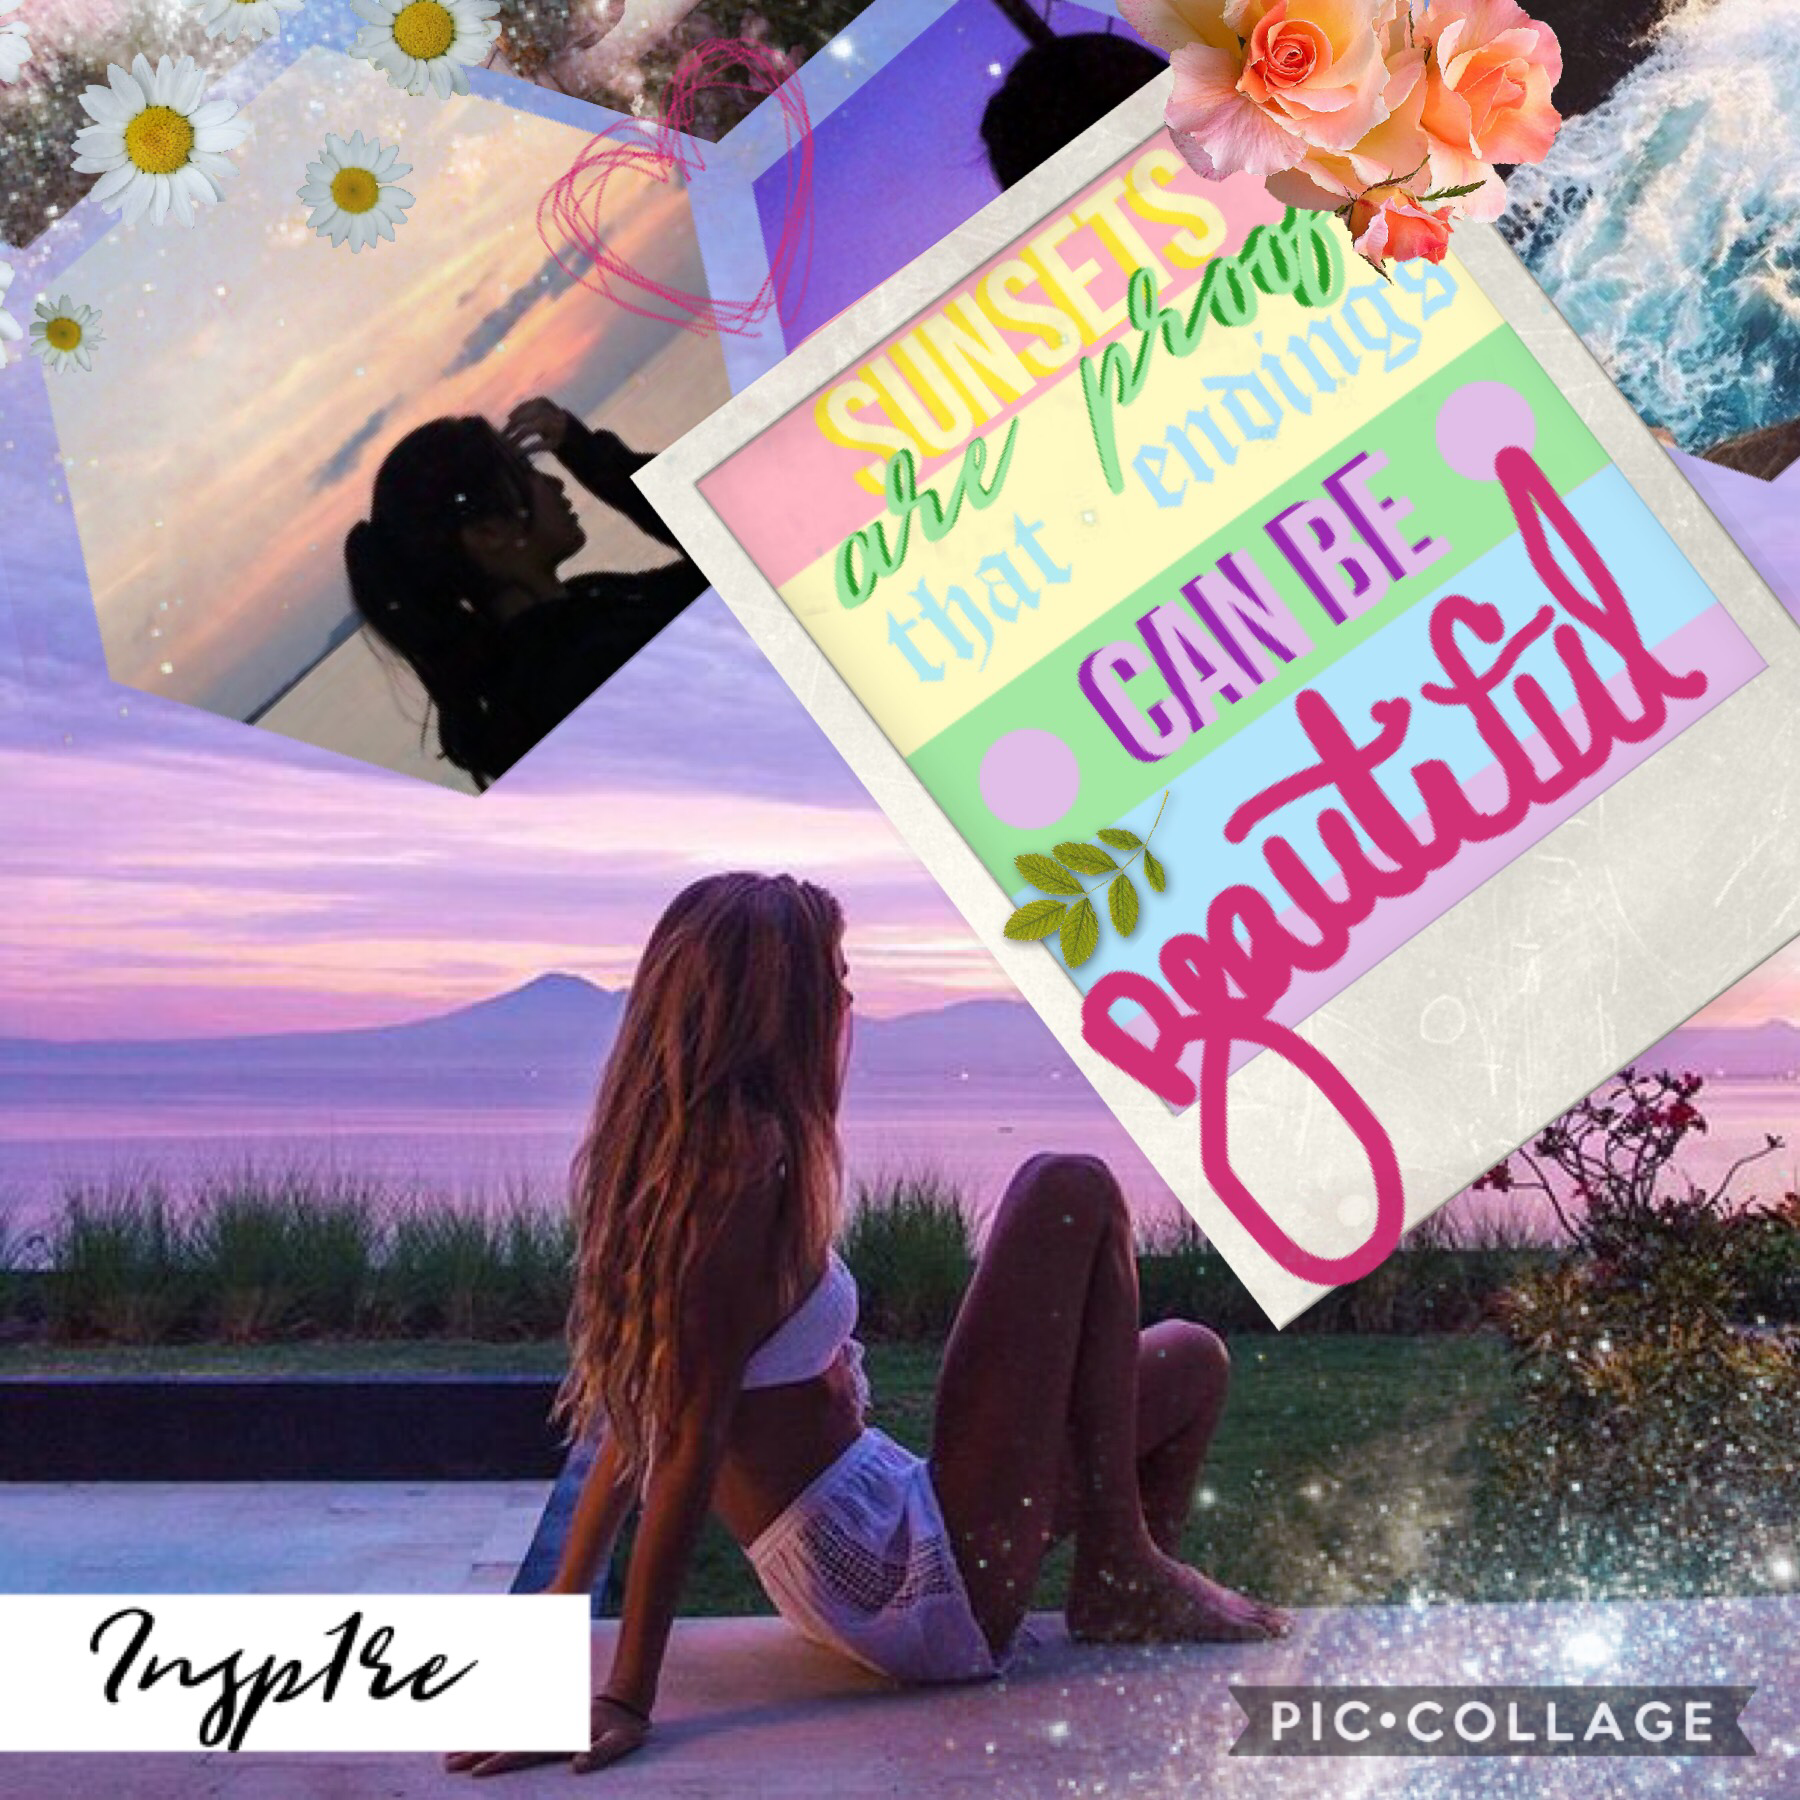  1st collage! Tap!
Hello guys! Do you like it?? Plz rate 1-10 thx❤️